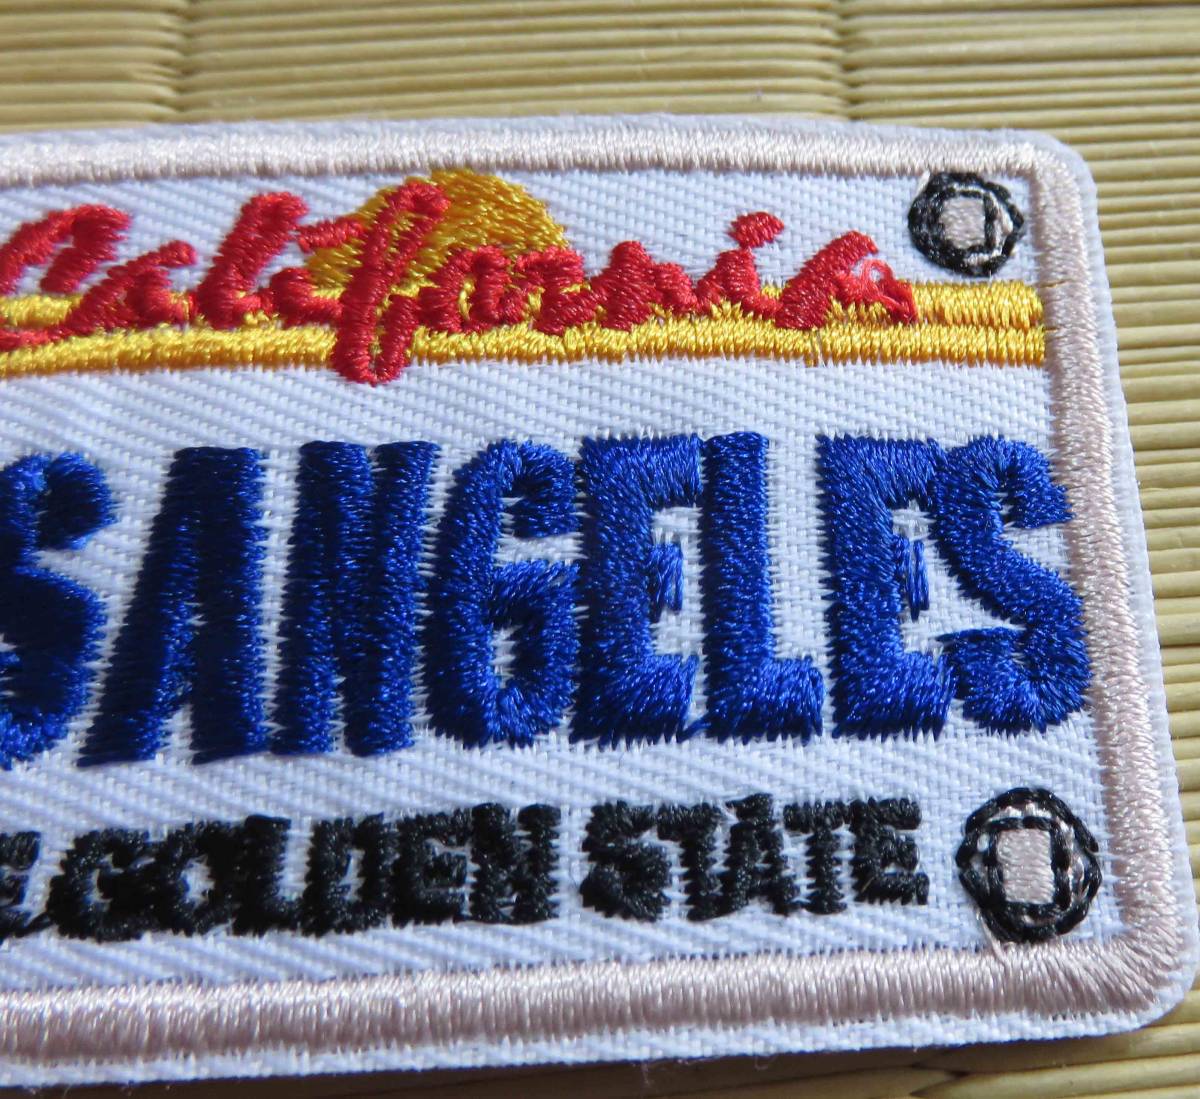  four angle * new goods Los Angeles Los Angeles America embroidery badge * automobile number plate # military US fashion # Western-style clothes * clothes * clothing DIY